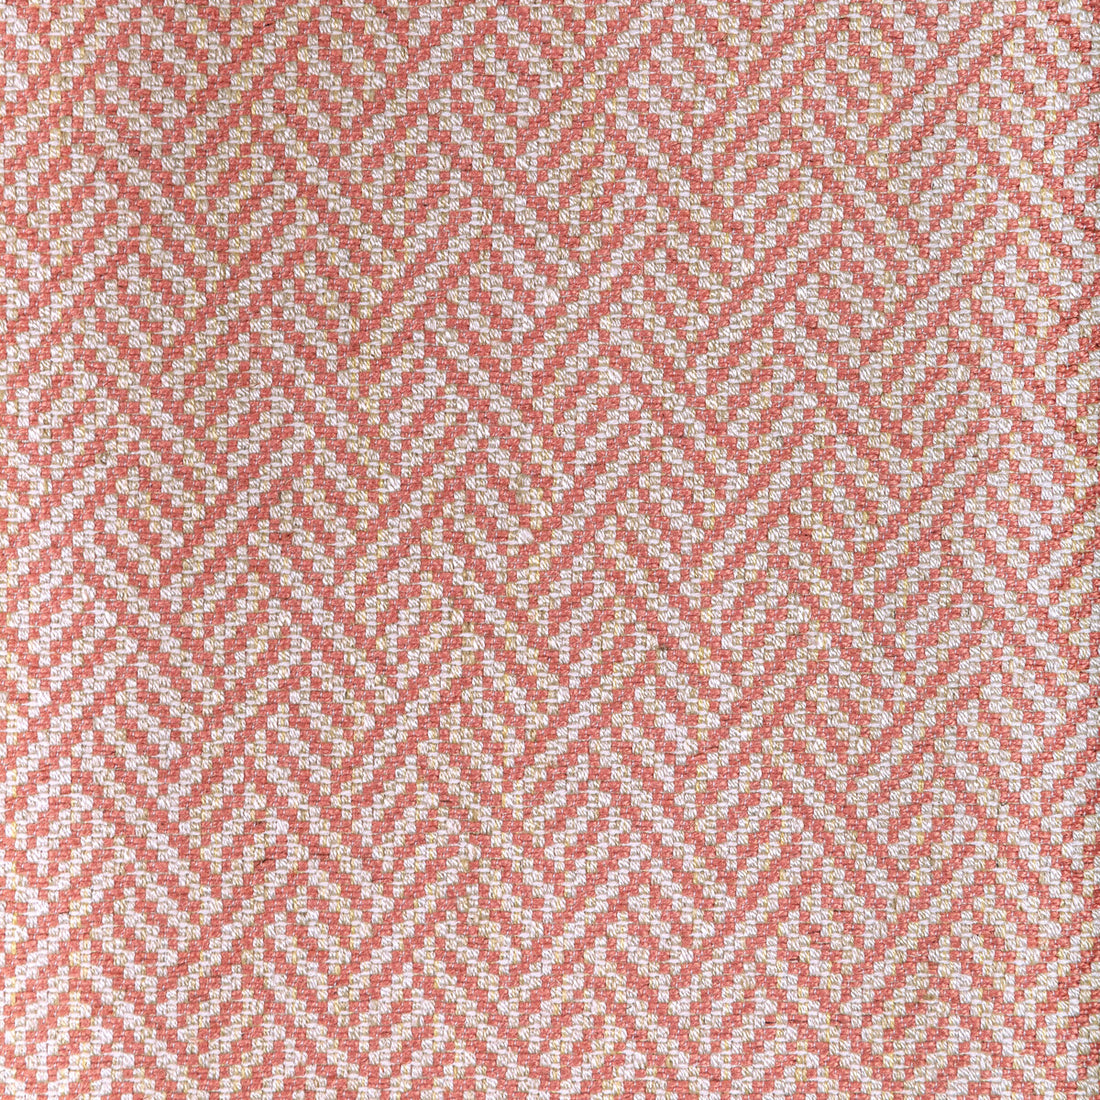 Colbert Weave fabric in petal color - pattern 8022108.7.0 - by Brunschwig &amp; Fils in the Lorient Weaves collection